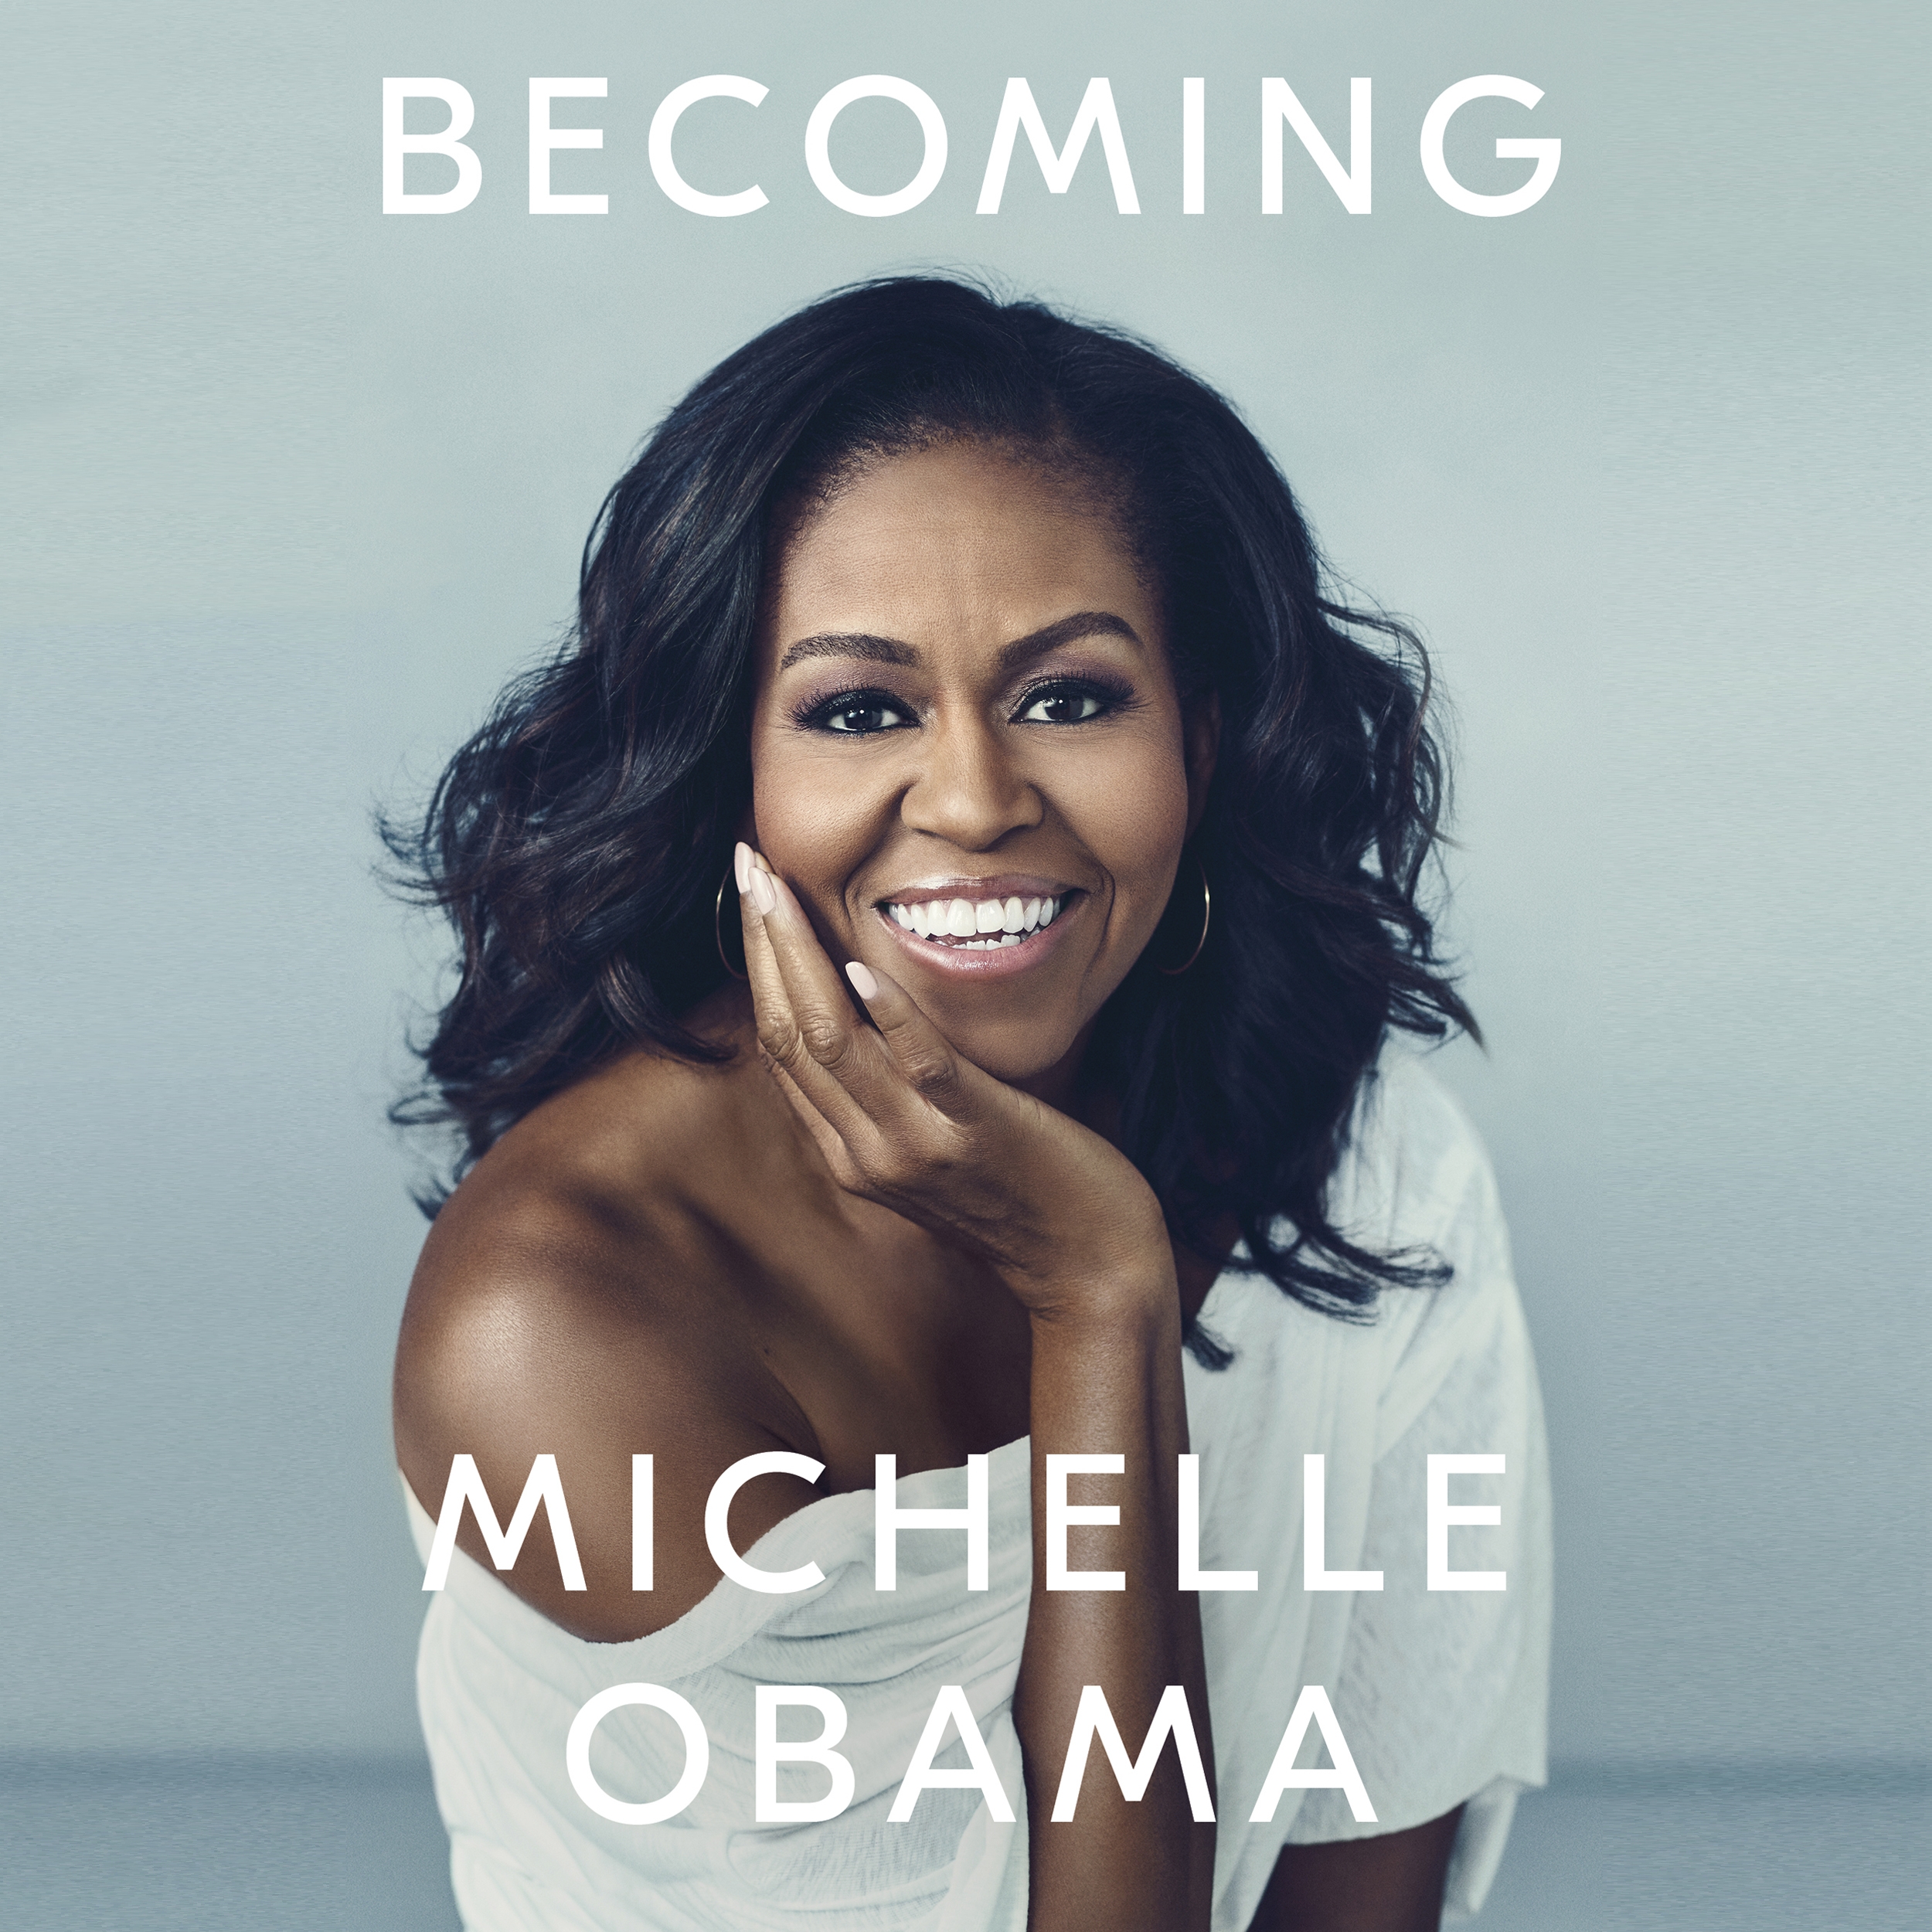 Audiobook image for Becoming: a grey background with a photograph of Michelle Obama taking up most of the cover. She's smiling to camera, resting her chin on her hand, wearing a white off-shoulder top.  The title is at the top in white font, and the author's name is at the bottom in bigger white font.